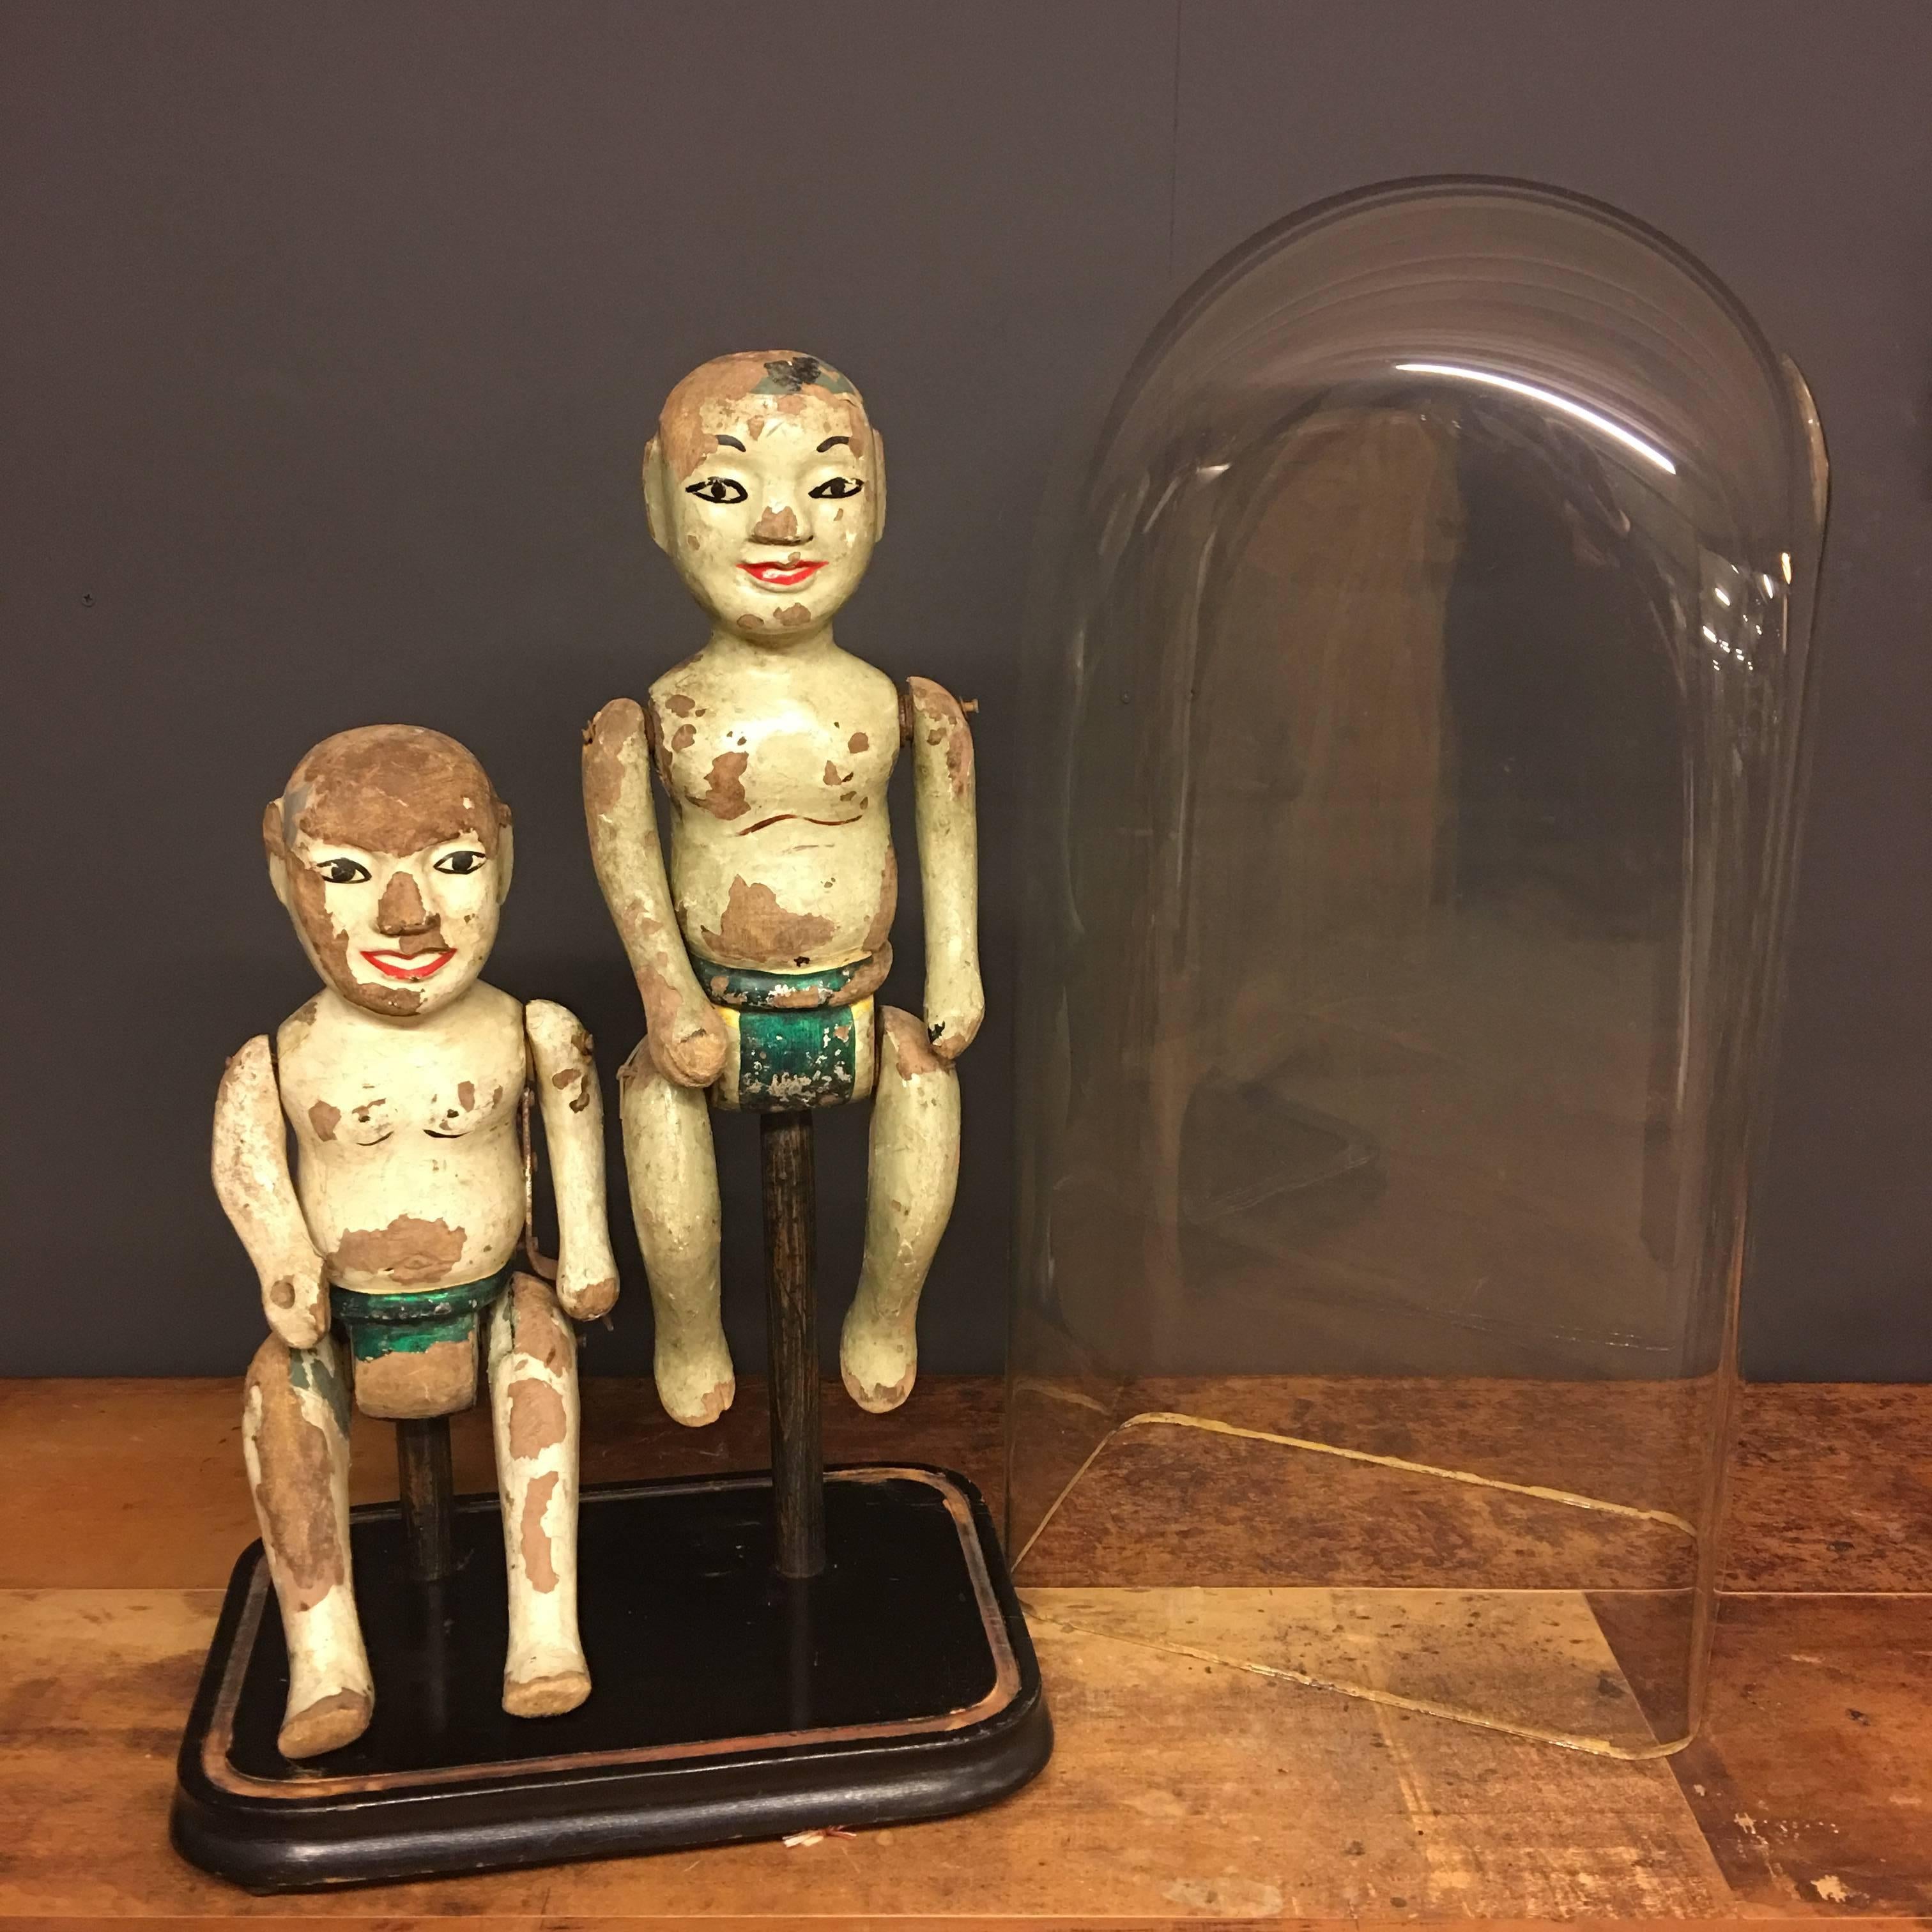 This rare pair of antique puppets is made in Vietnam during the 19th century.
They were used in the famous Vietnamese water puppet show.
There are only a few of these puppets left, this pair was used in the same show. The puppets are carved wood